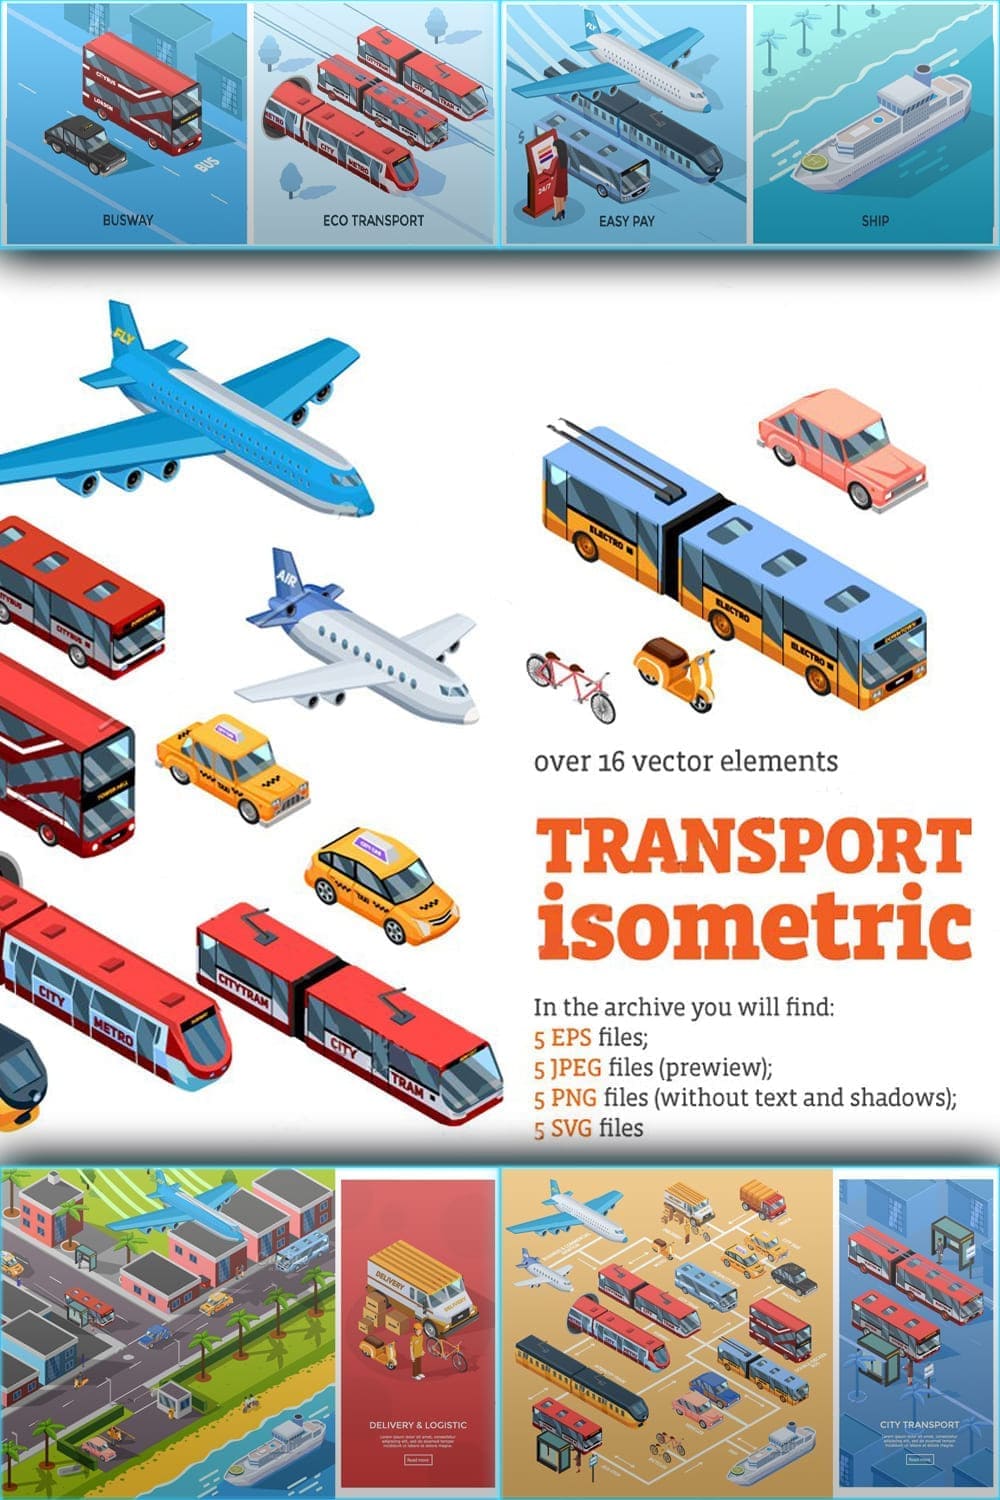 Isometric transport set, picture for pinterest 1000x1500.